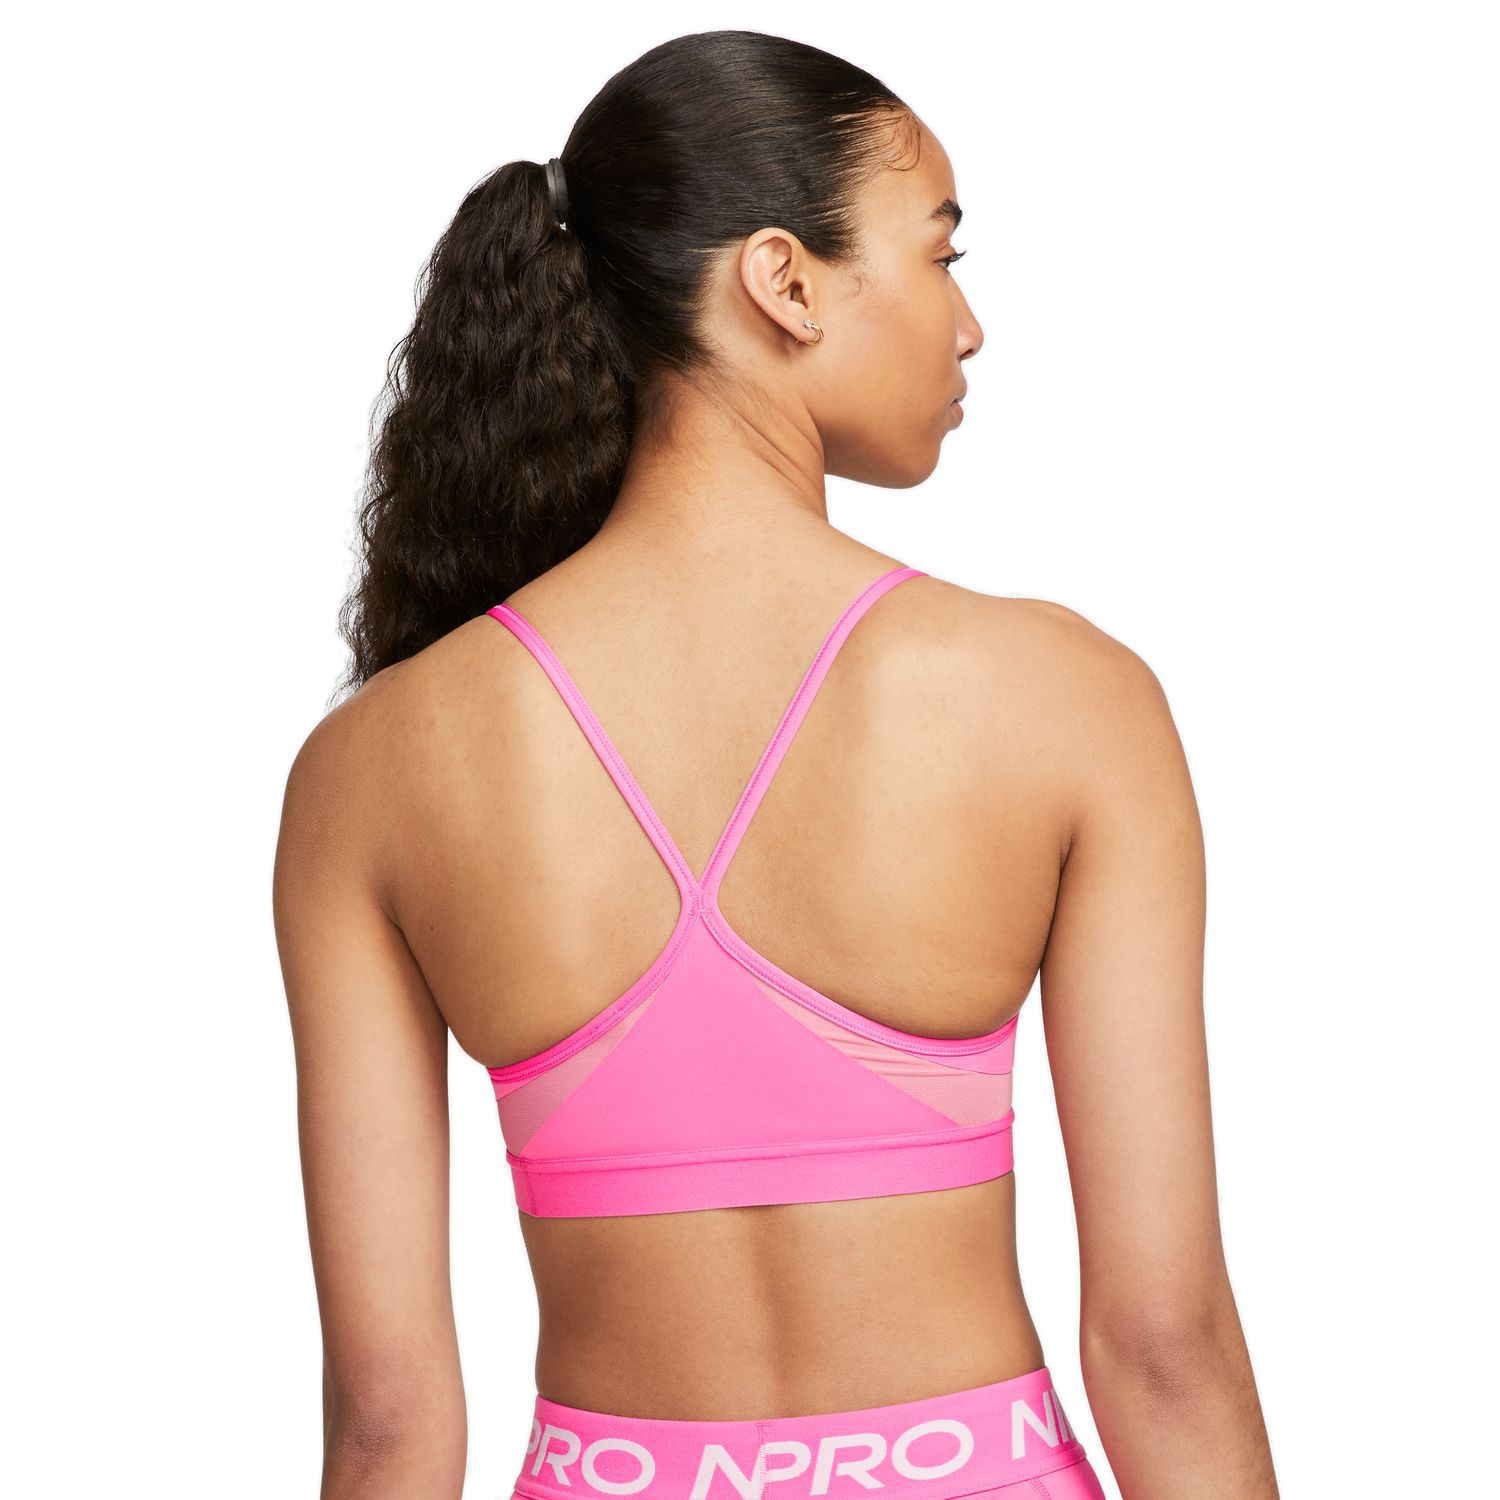 Nike Indy Air Pink Light Support Sports Bra Size M